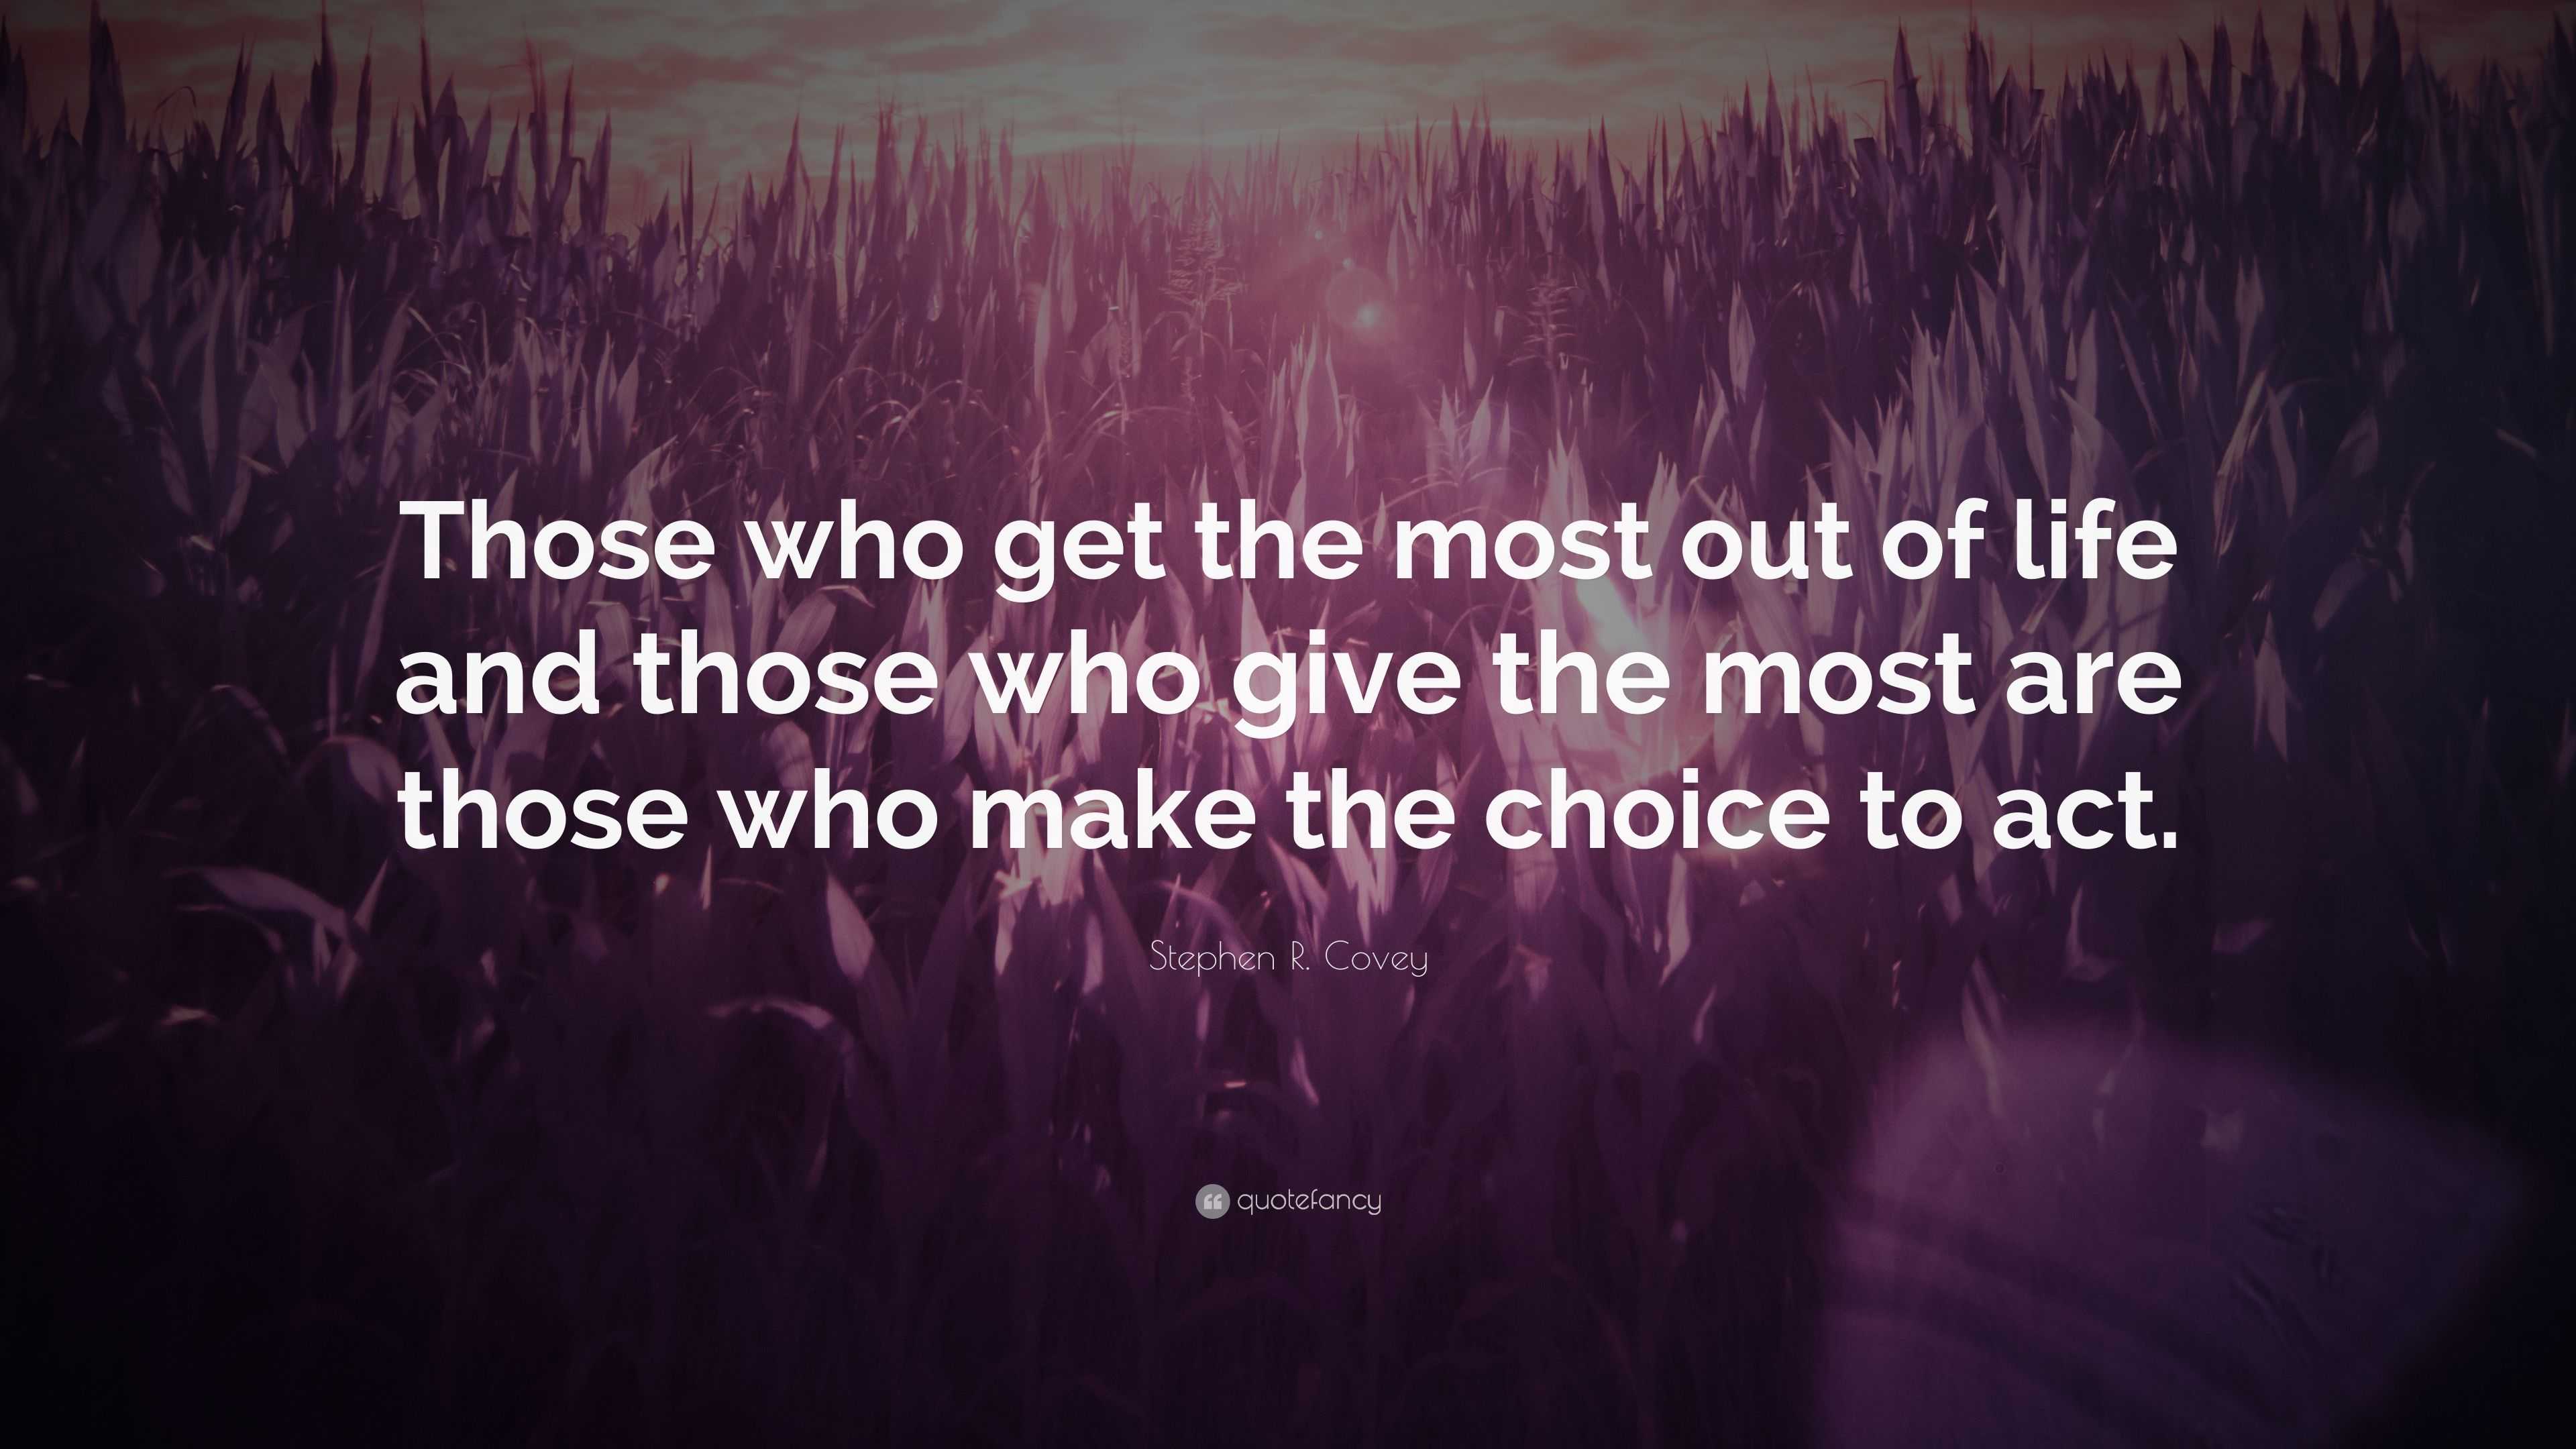 Stephen R Covey Quote “Those who the most out of life and